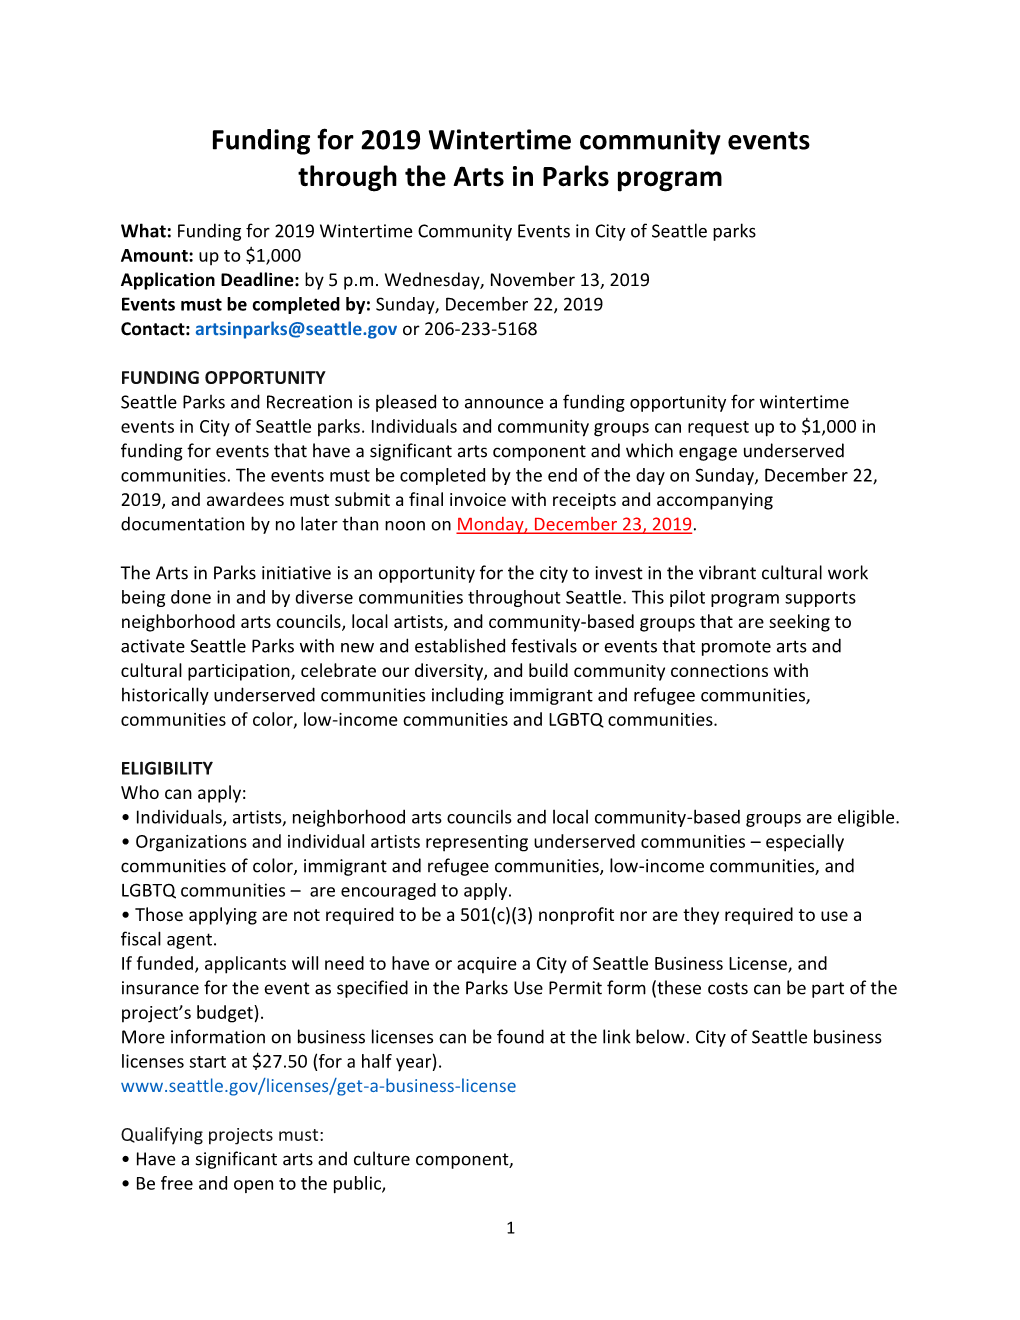 Funding for 2019 Wintertime Community Events Through the Arts in Parks Program